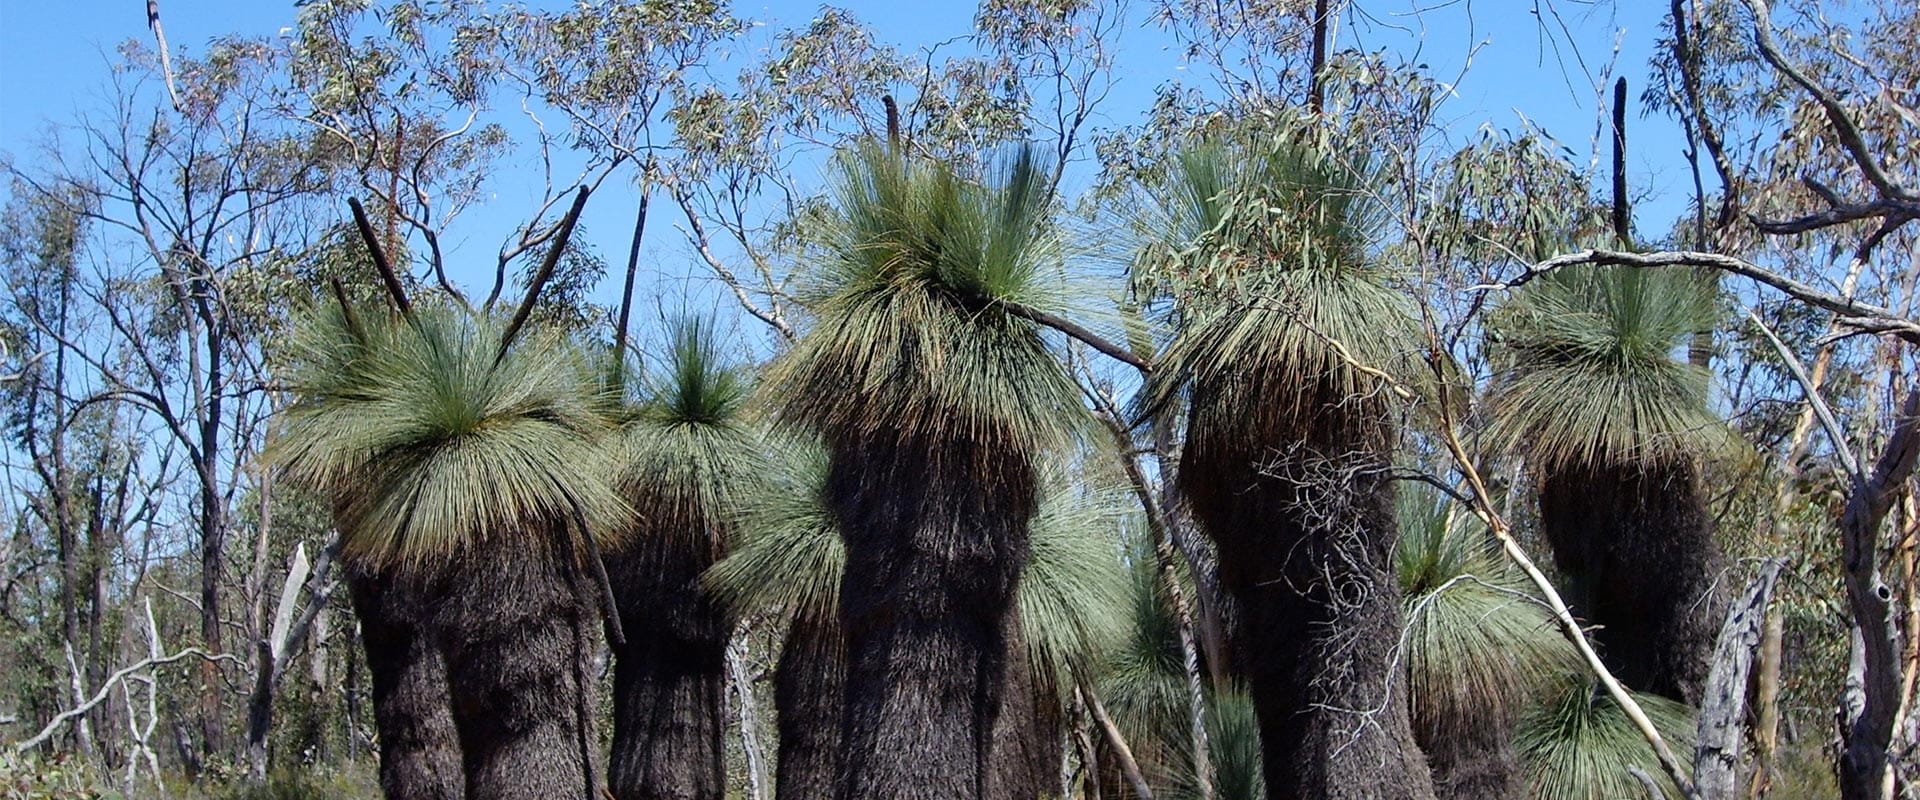 Row of grass trees standing amongst other native trees.